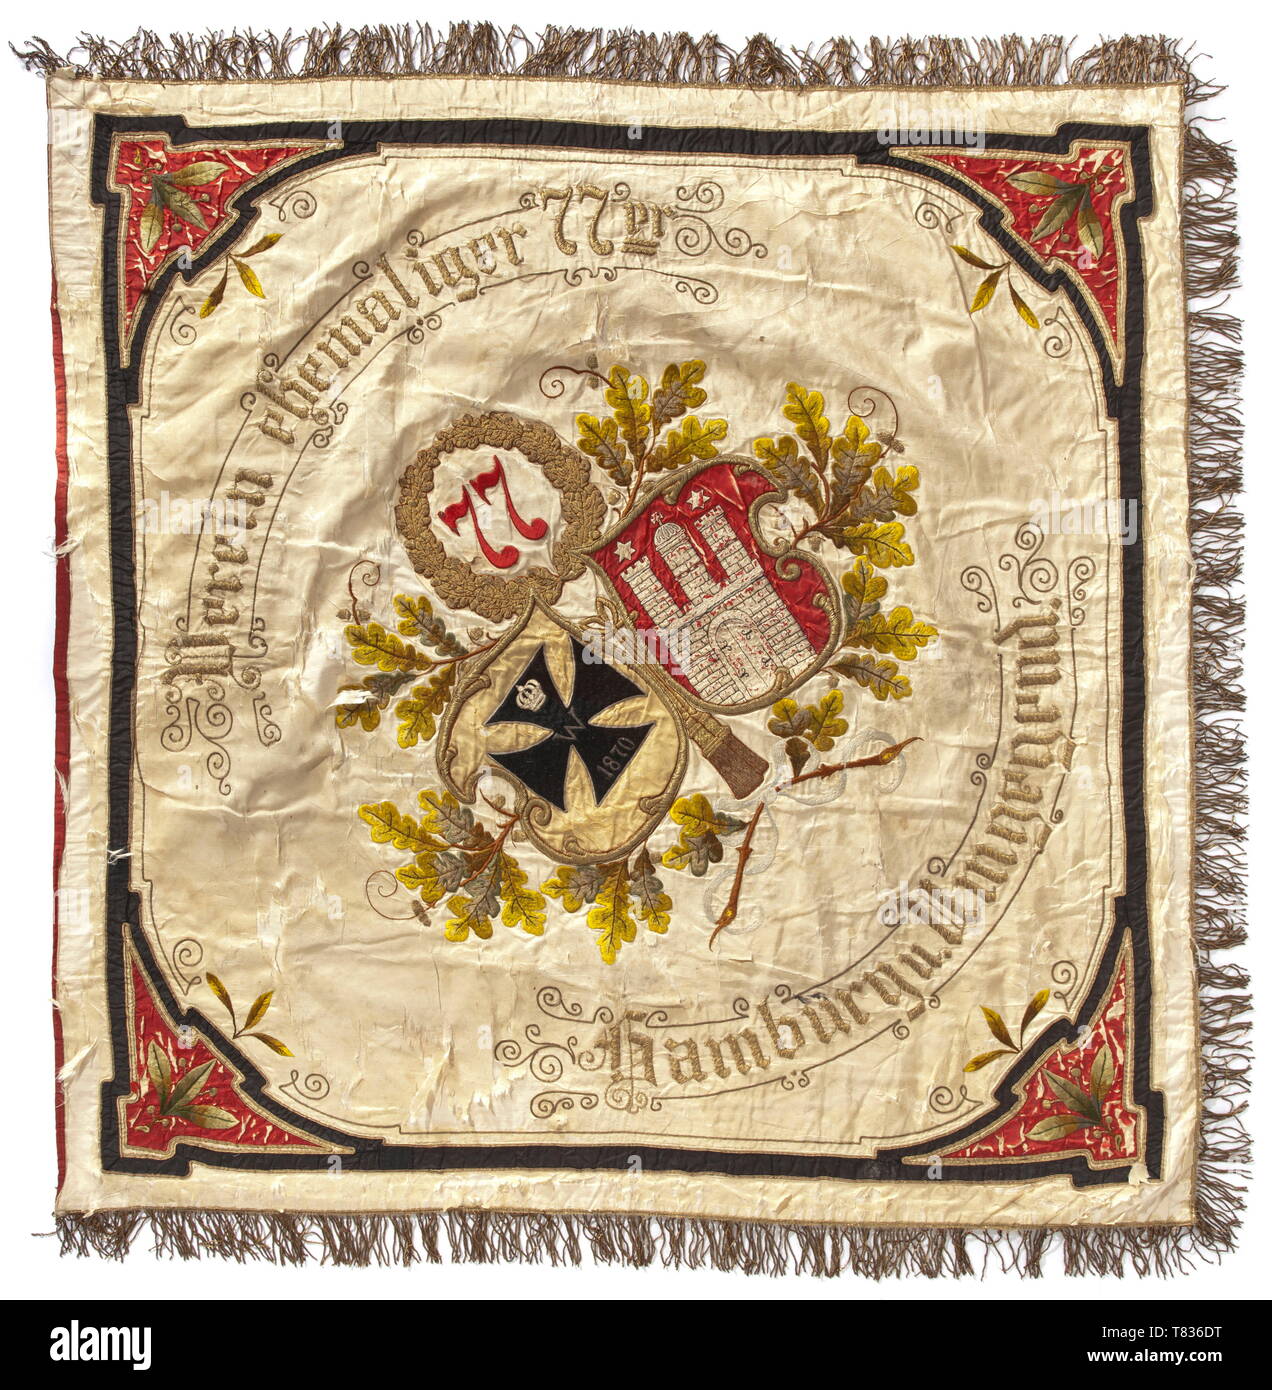 A flag of the veteransÂ´ association of the Infantry Regiment no. 77 The Regiment '2. Hannoversche' was established with its base in Celle in 1813. The flag of polychrome silk cloth with gold fringe border, embroidered inscriptions 'Verein ehemaliger 77er - Hamburg und Umgebung' and 'Mit Gott für Kaiser und Reich - 1901 - 2. Hannov. Inf. R. 77', size circa 130 x 140 cm. With flag pole of blackened hard wood, collapsible into two pieces. Brass finial, pierced with soldered-in multi-part Iron Cross of 1914. On the pole a total of nine mounted flag , Additional-Rights-Clearance-Info-Not-Available Stock Photo